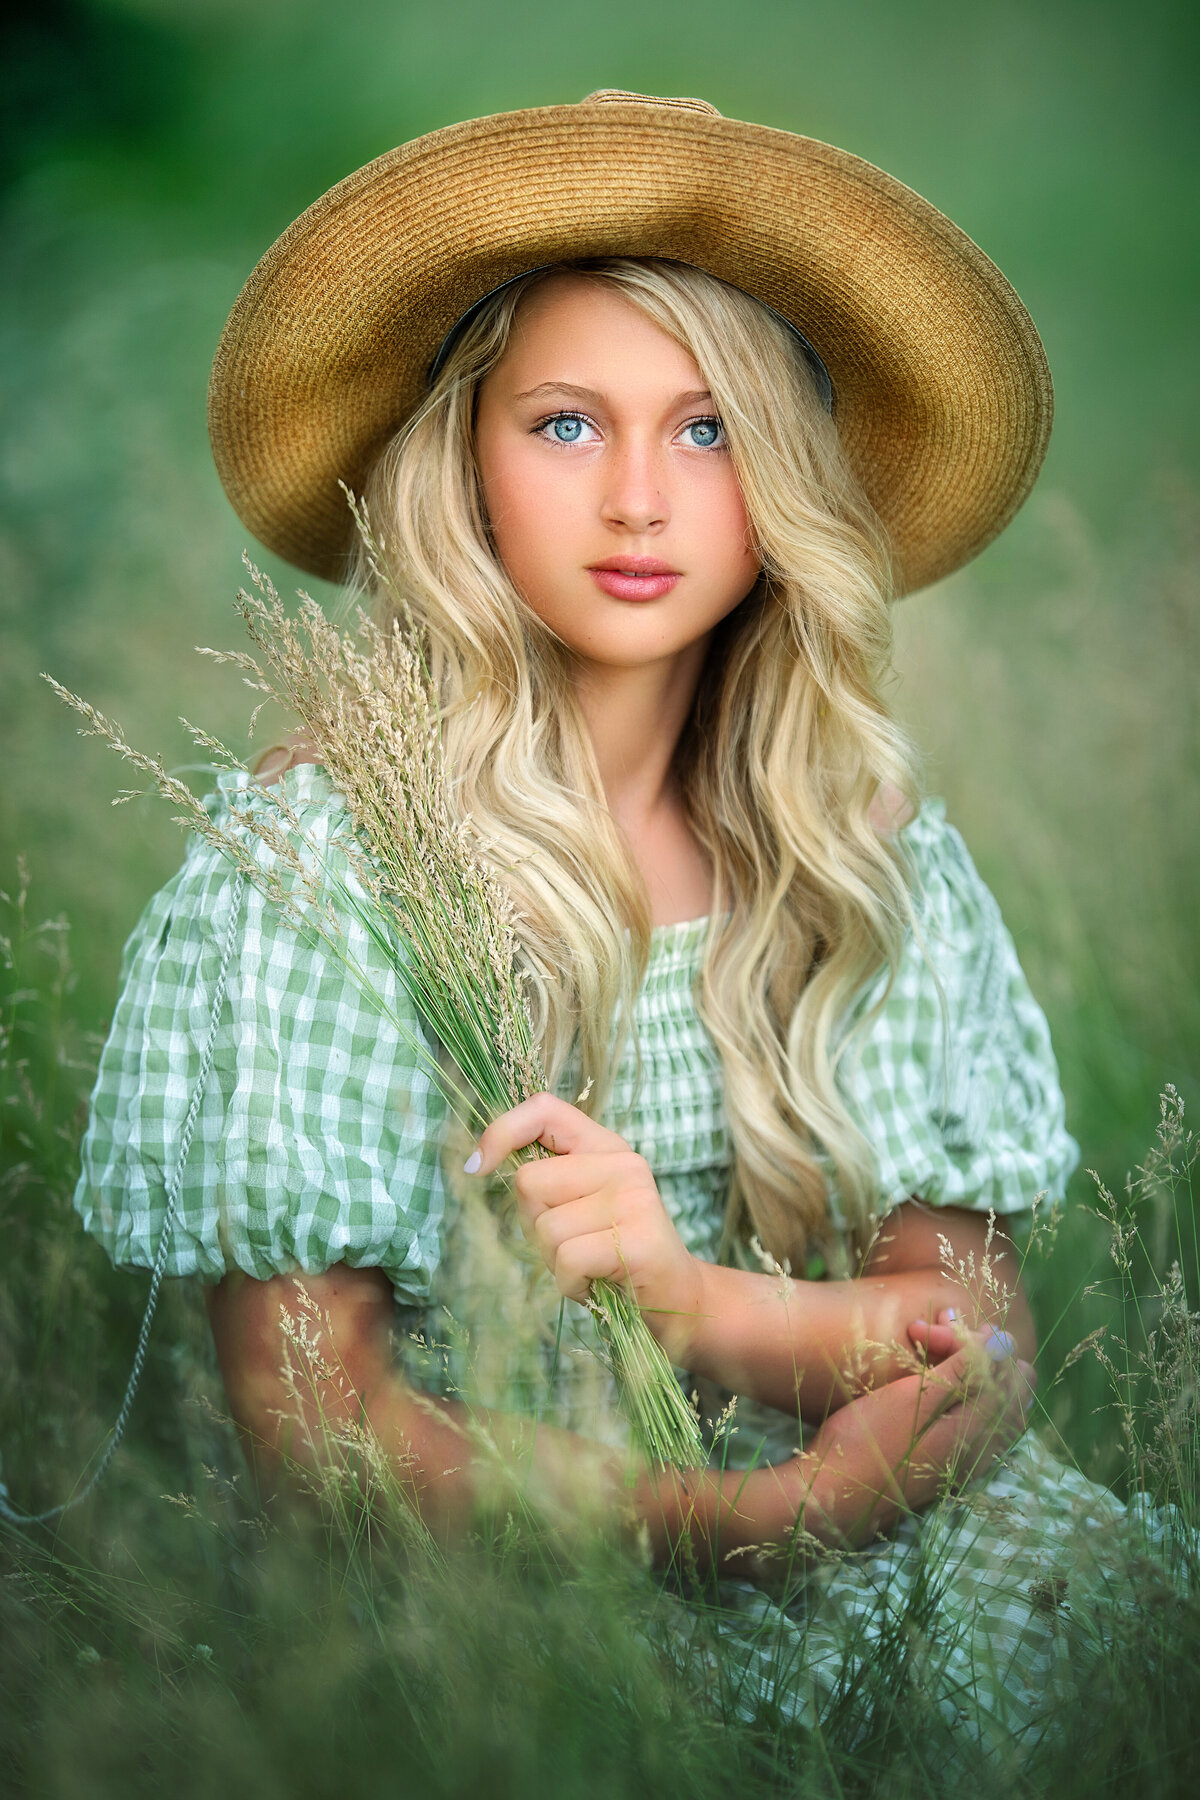 Blond girl with blue eyes and straw hat and green dress sitting in the tall grass.